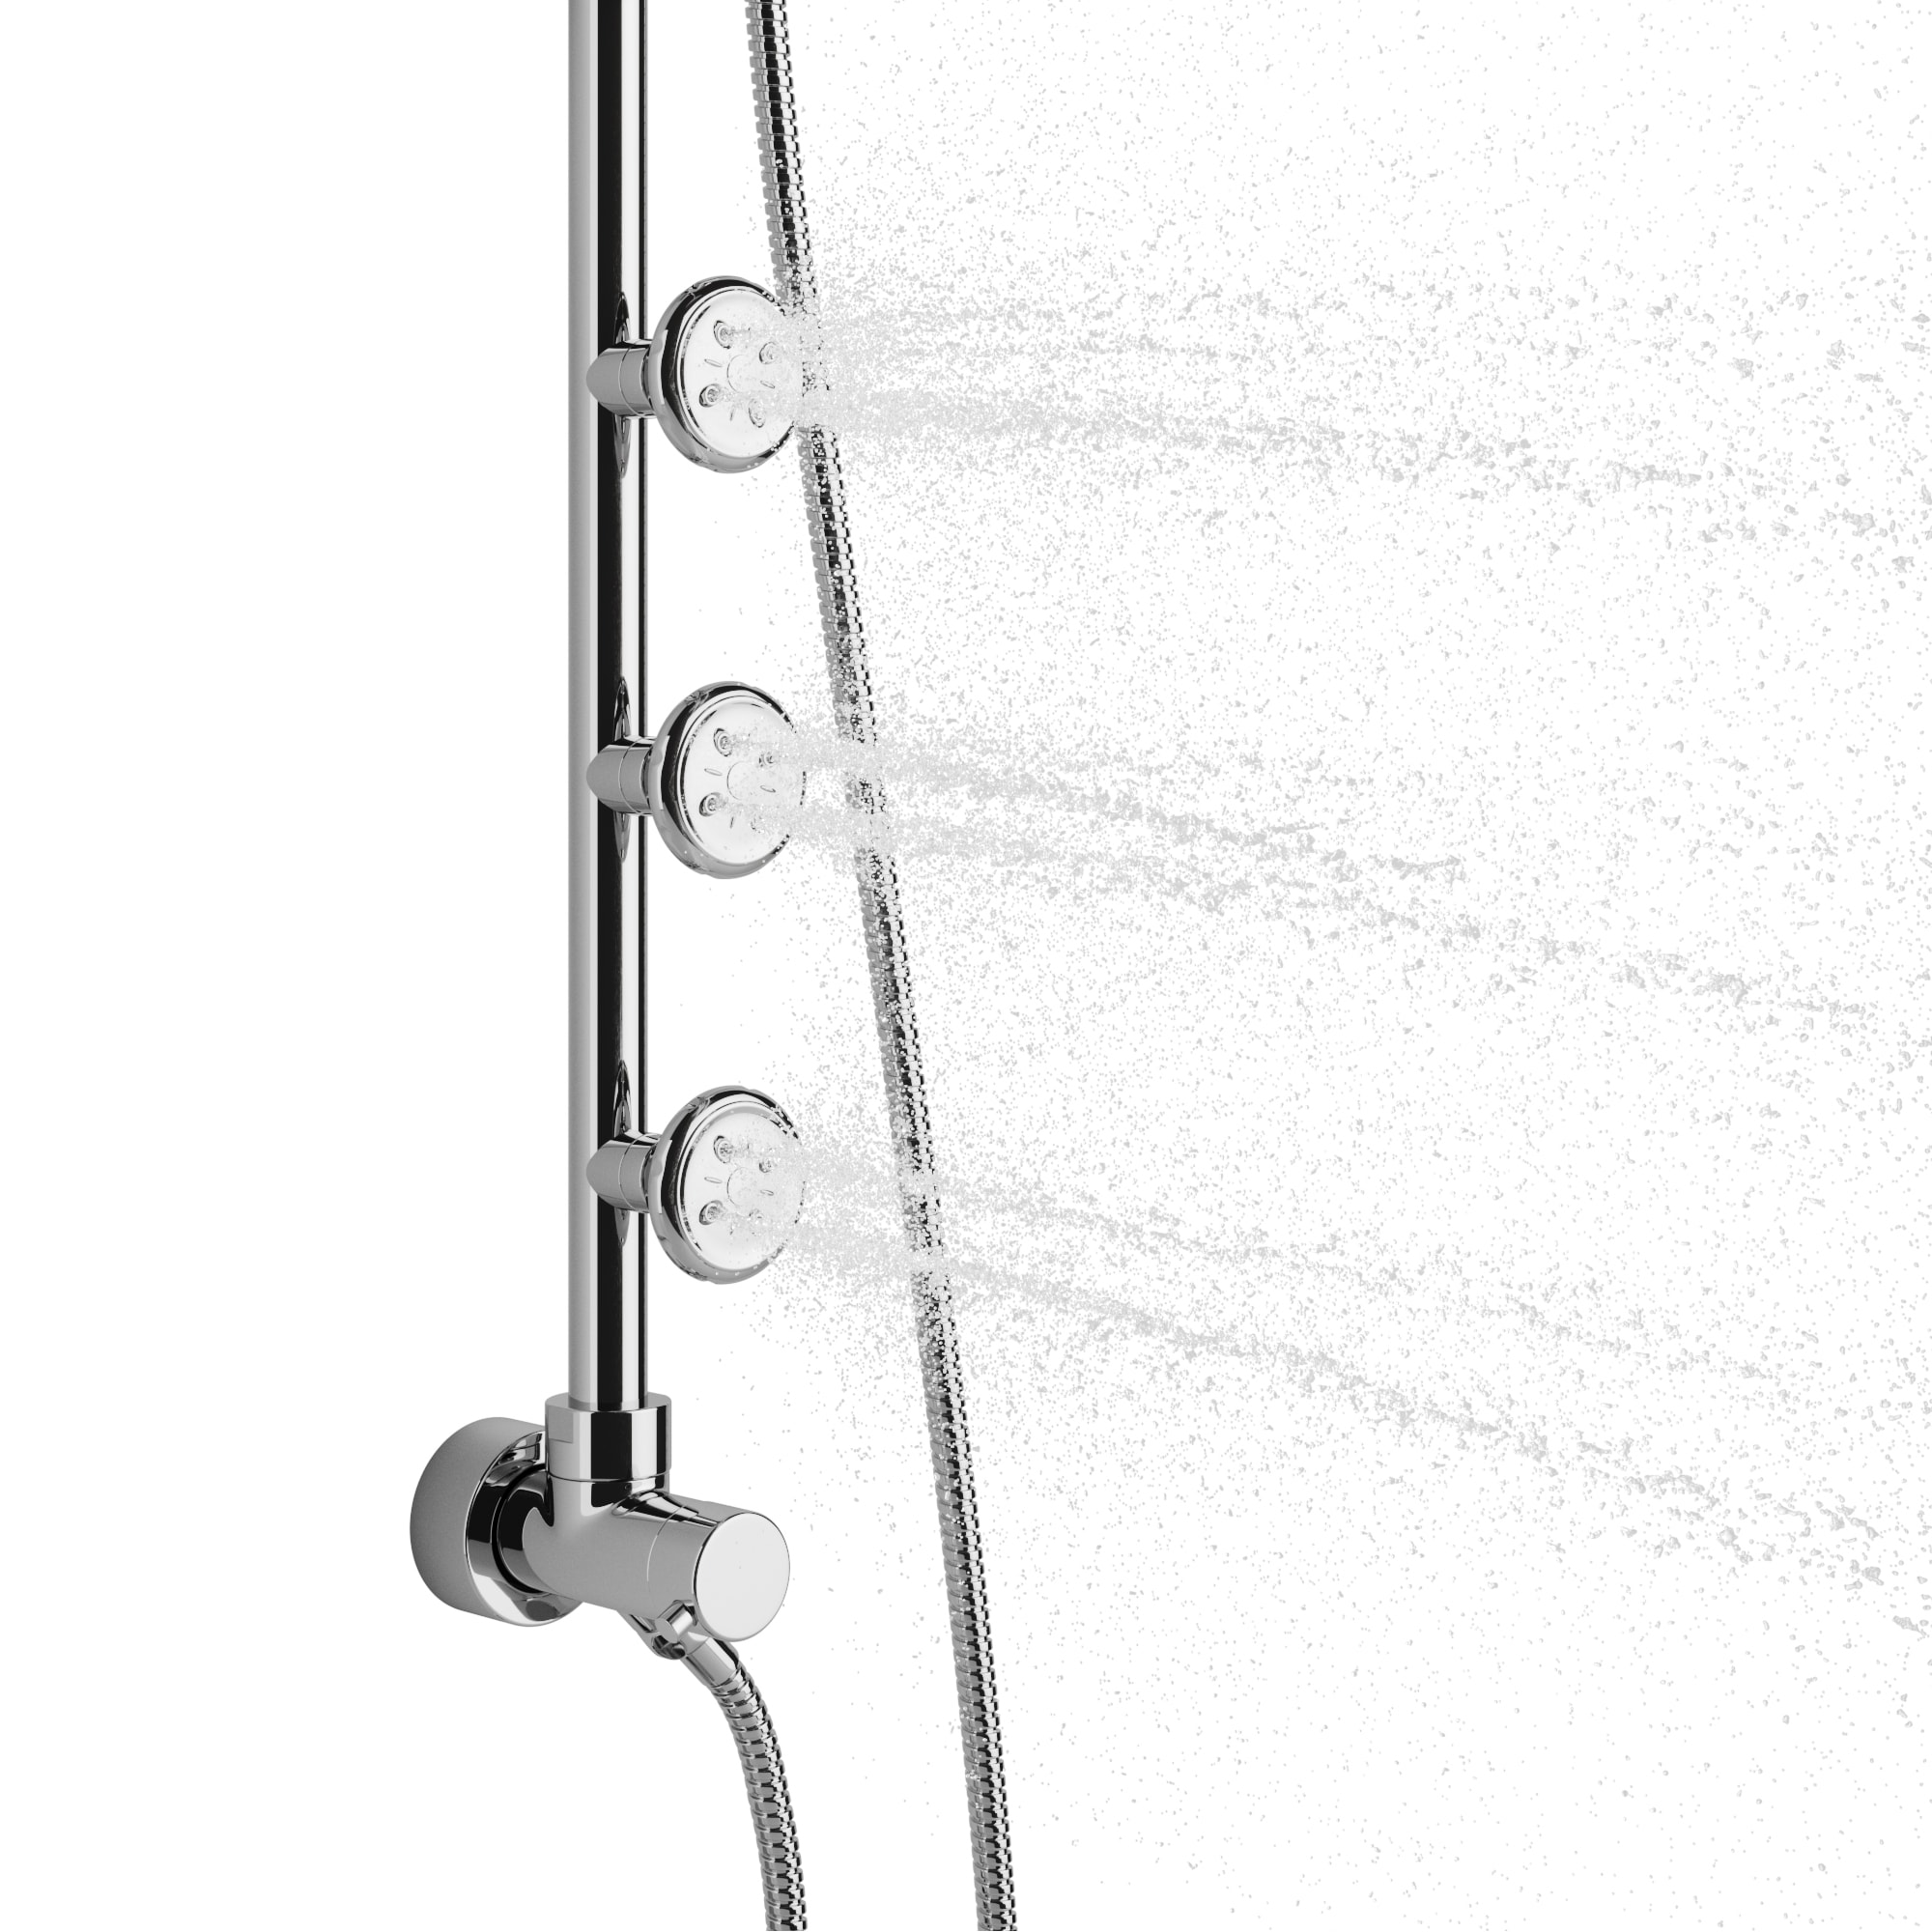 PULSE Chrome Shower Faucet Bar System with 3-way Diverter